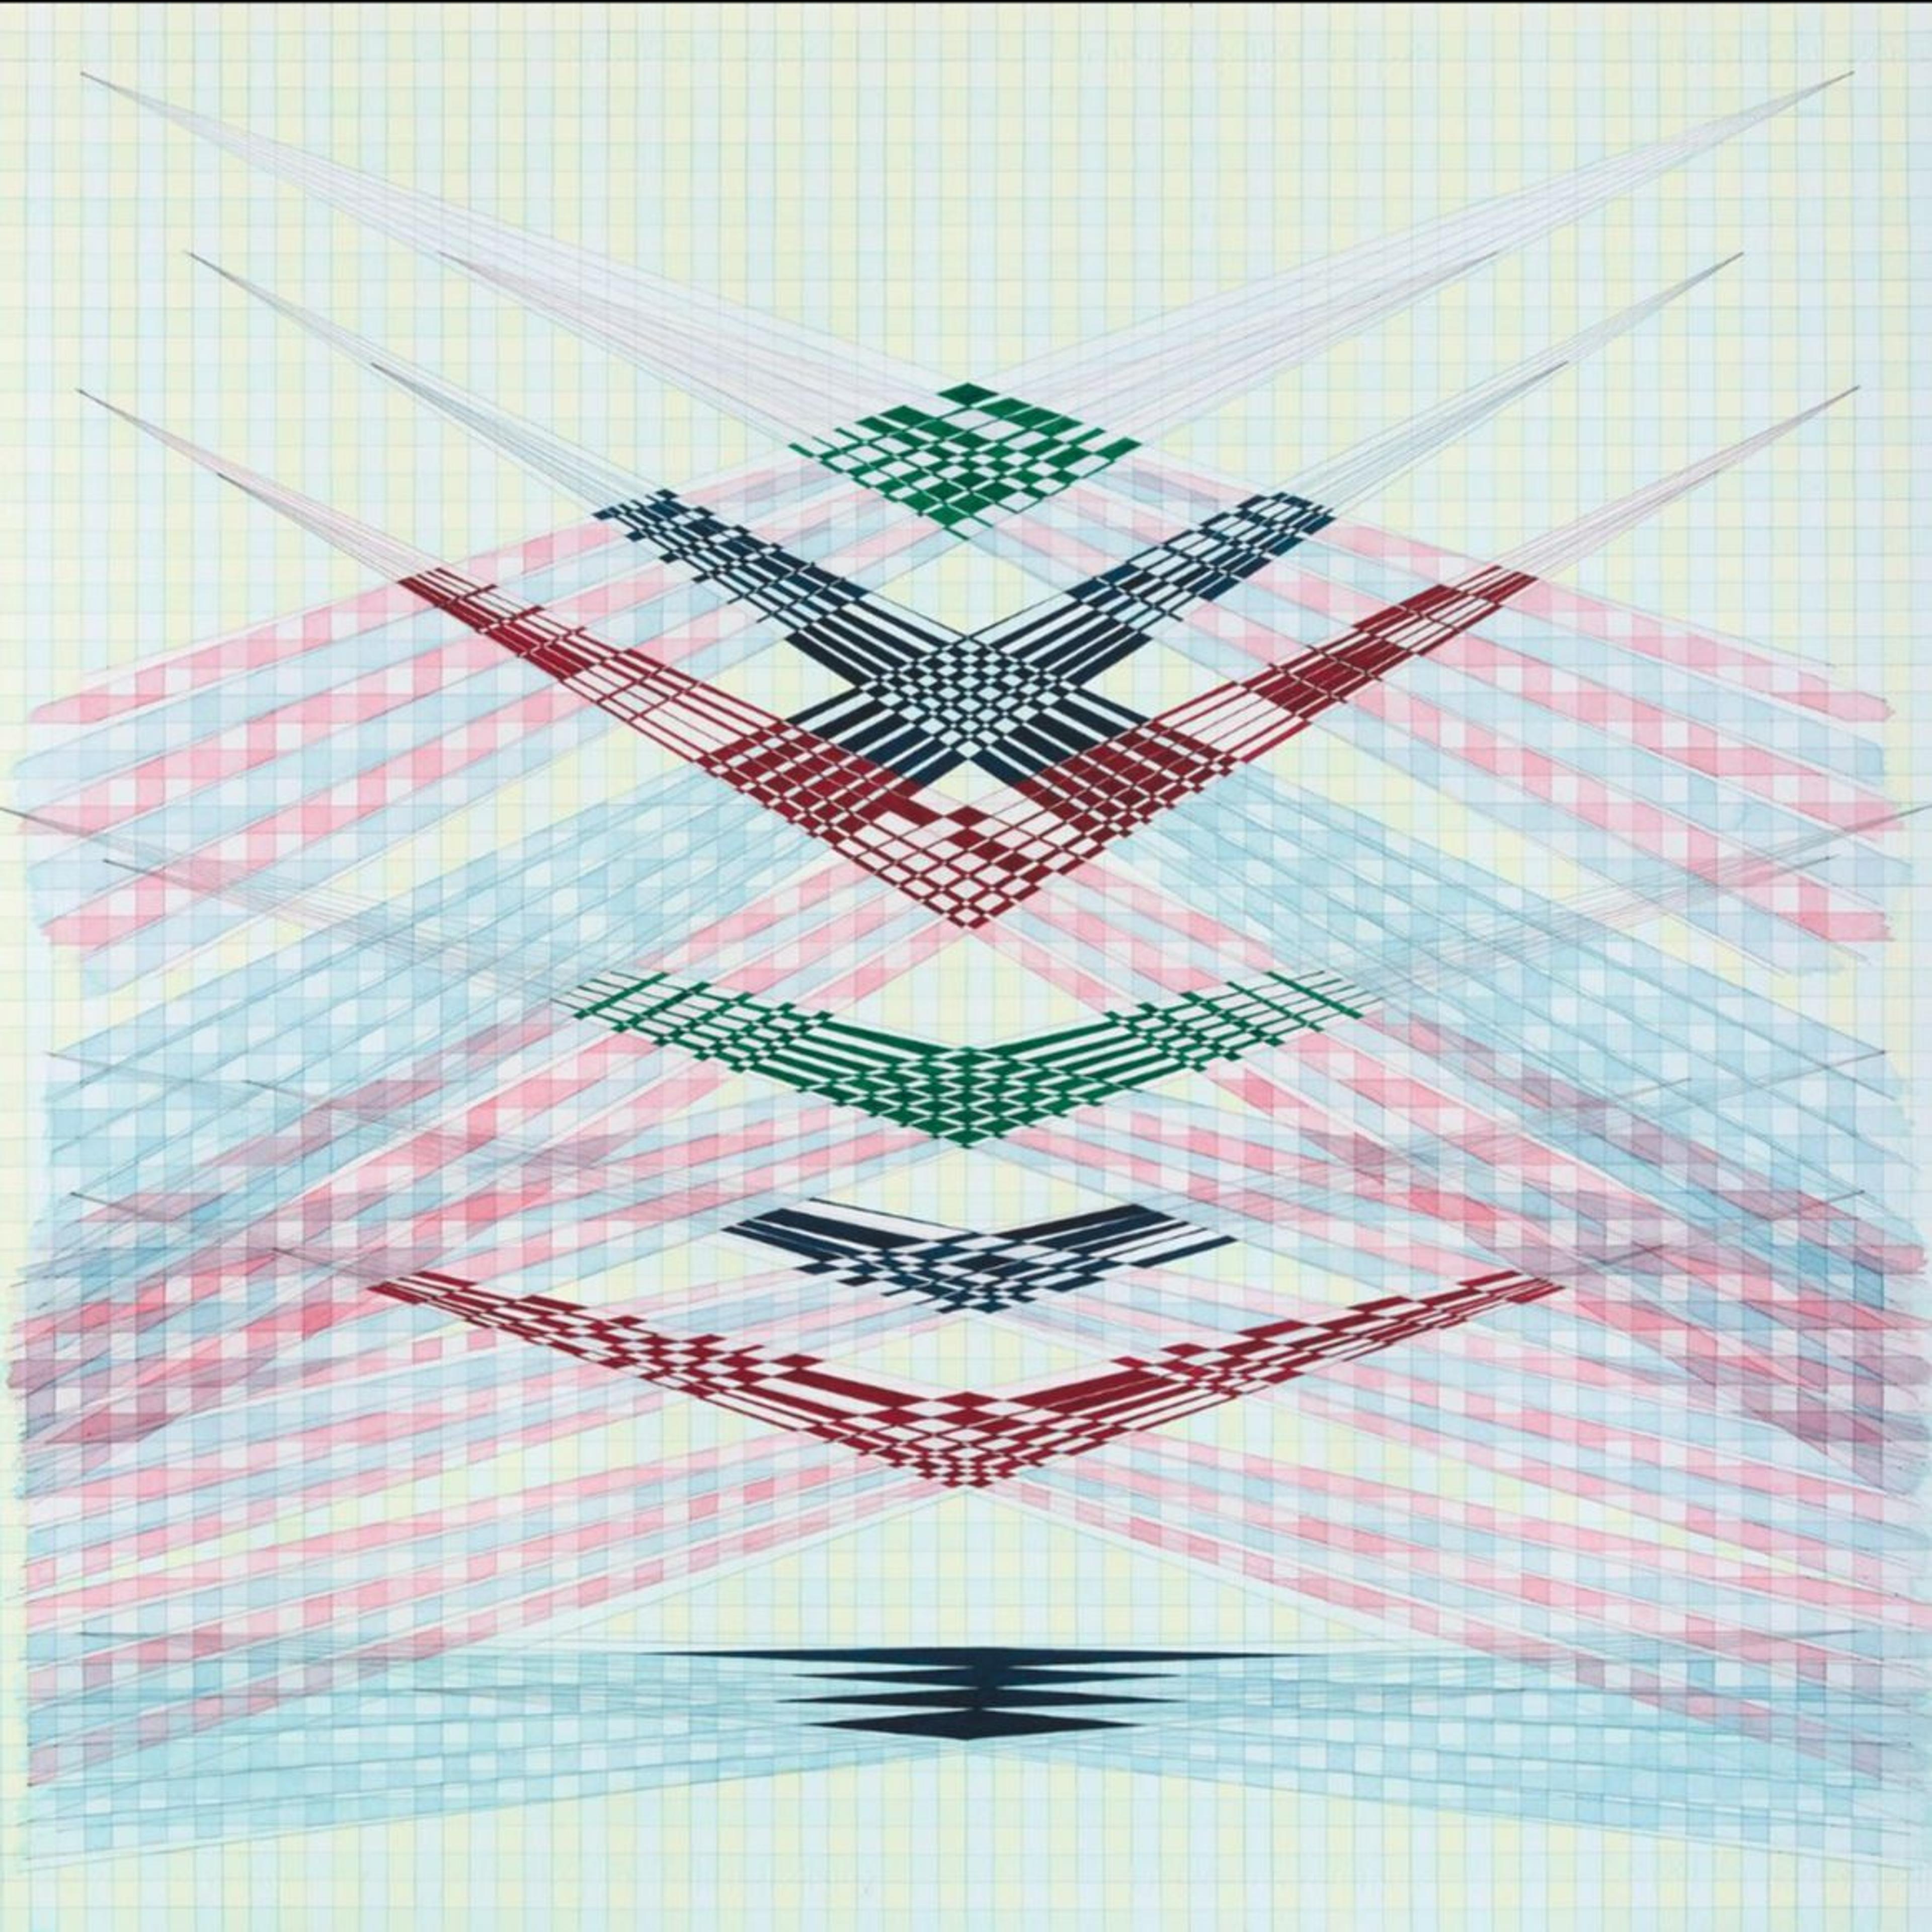 Kathy Barry, Dimensional Ecologies, 2013, watercolour and pencil on paper, 700 x 720 mm, courtesy of the artist and Bowen Galleries, Wellington. Photo credit: Phreon Fine Art Printers